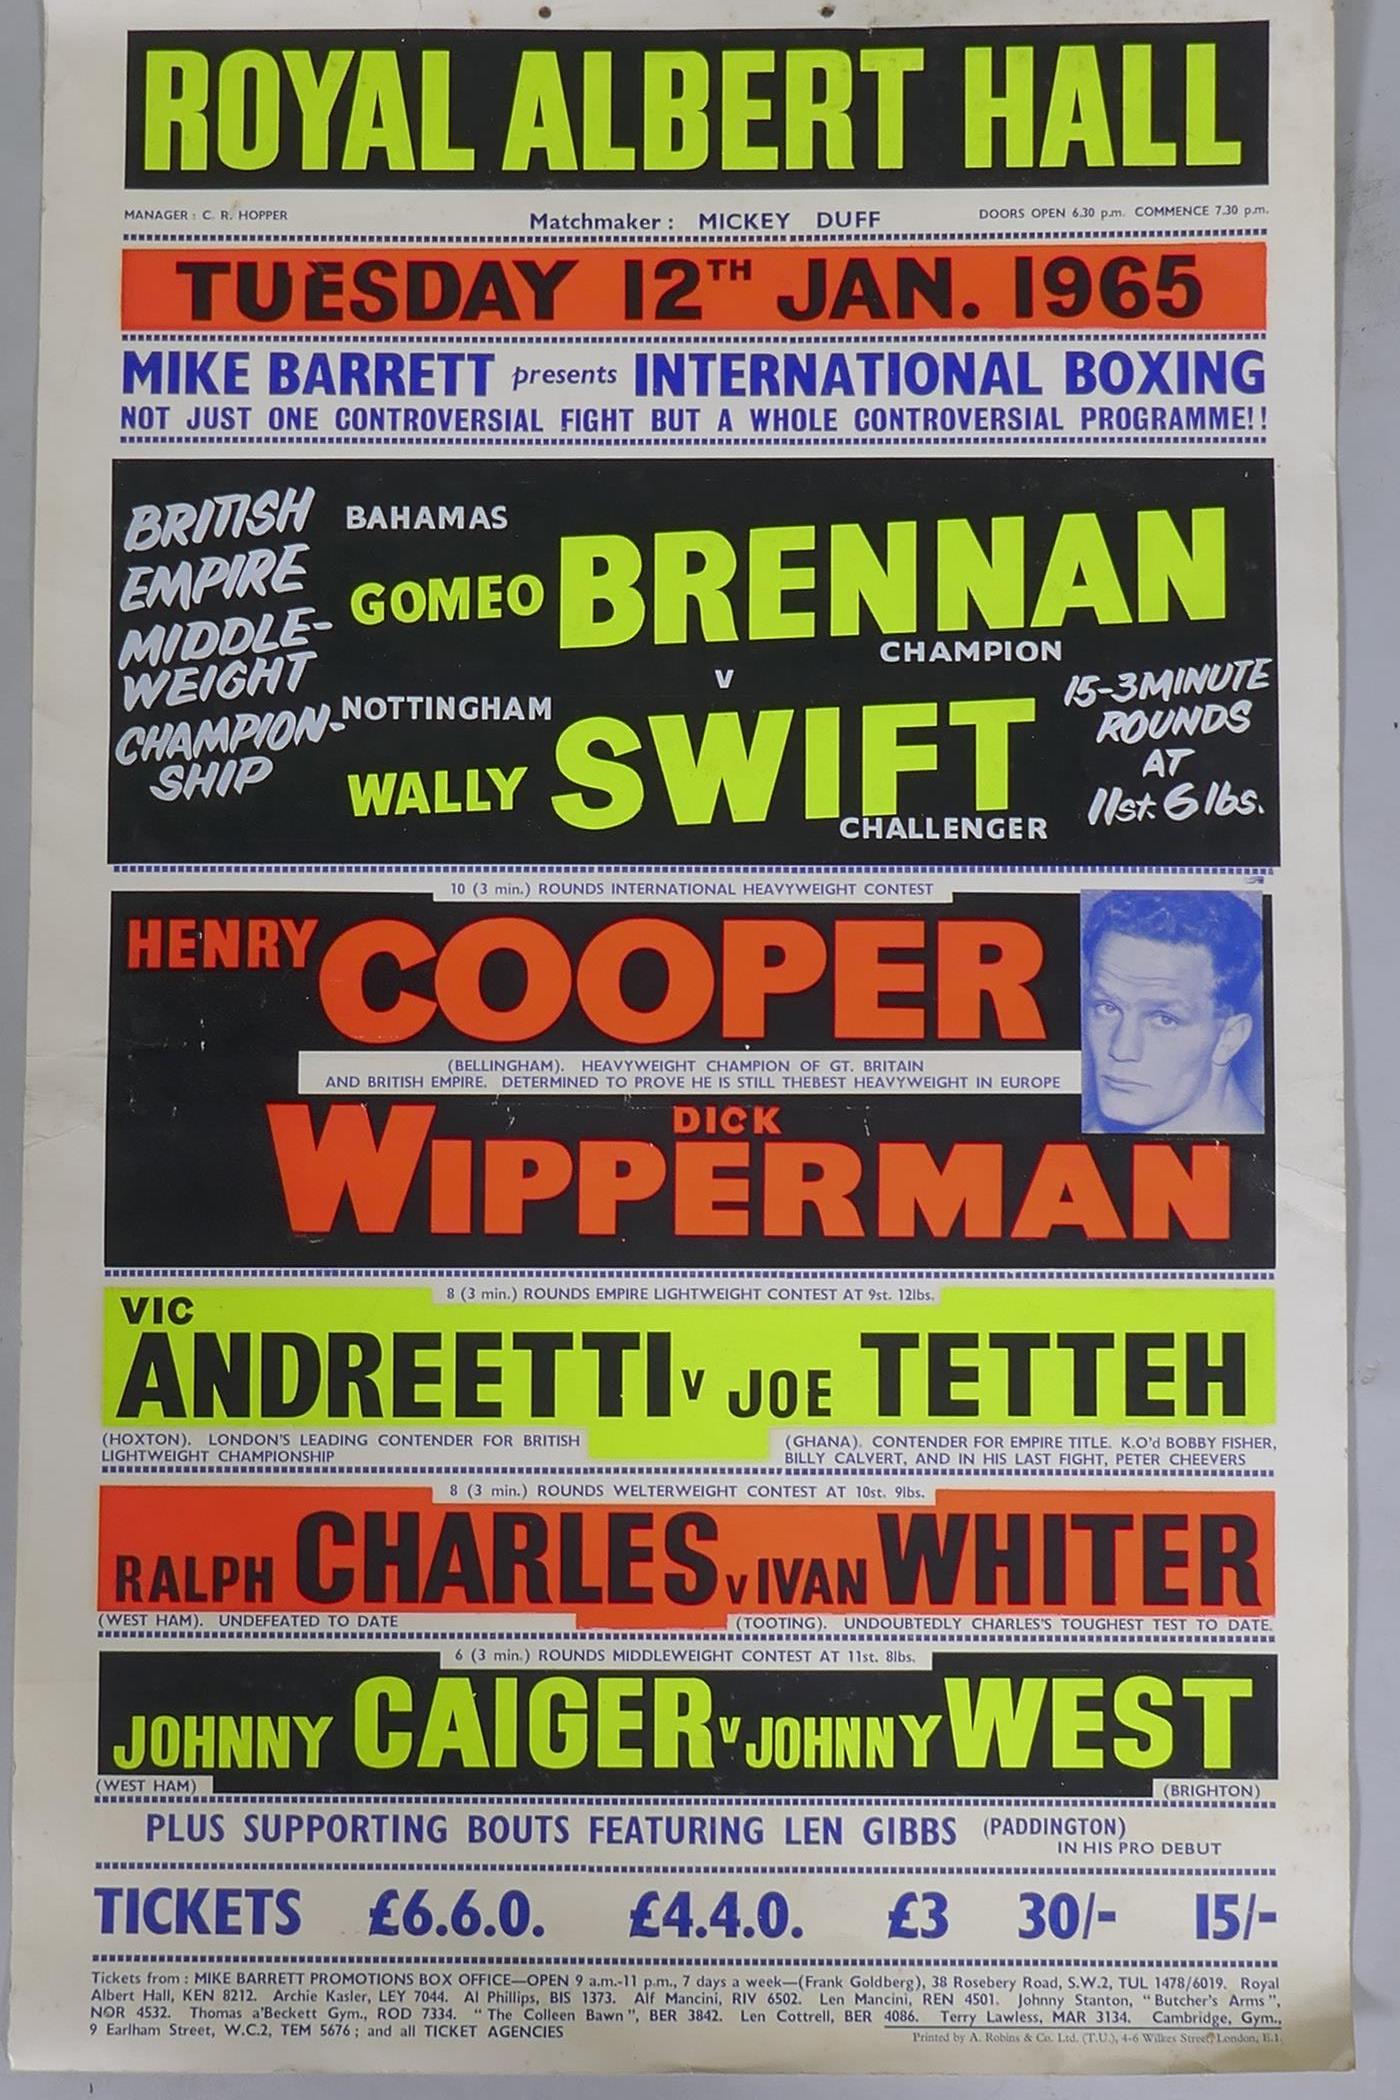 Of boxing interest: Henry Cooper v Dick Wipperman, international heavyweight contest, Tuesday 12th